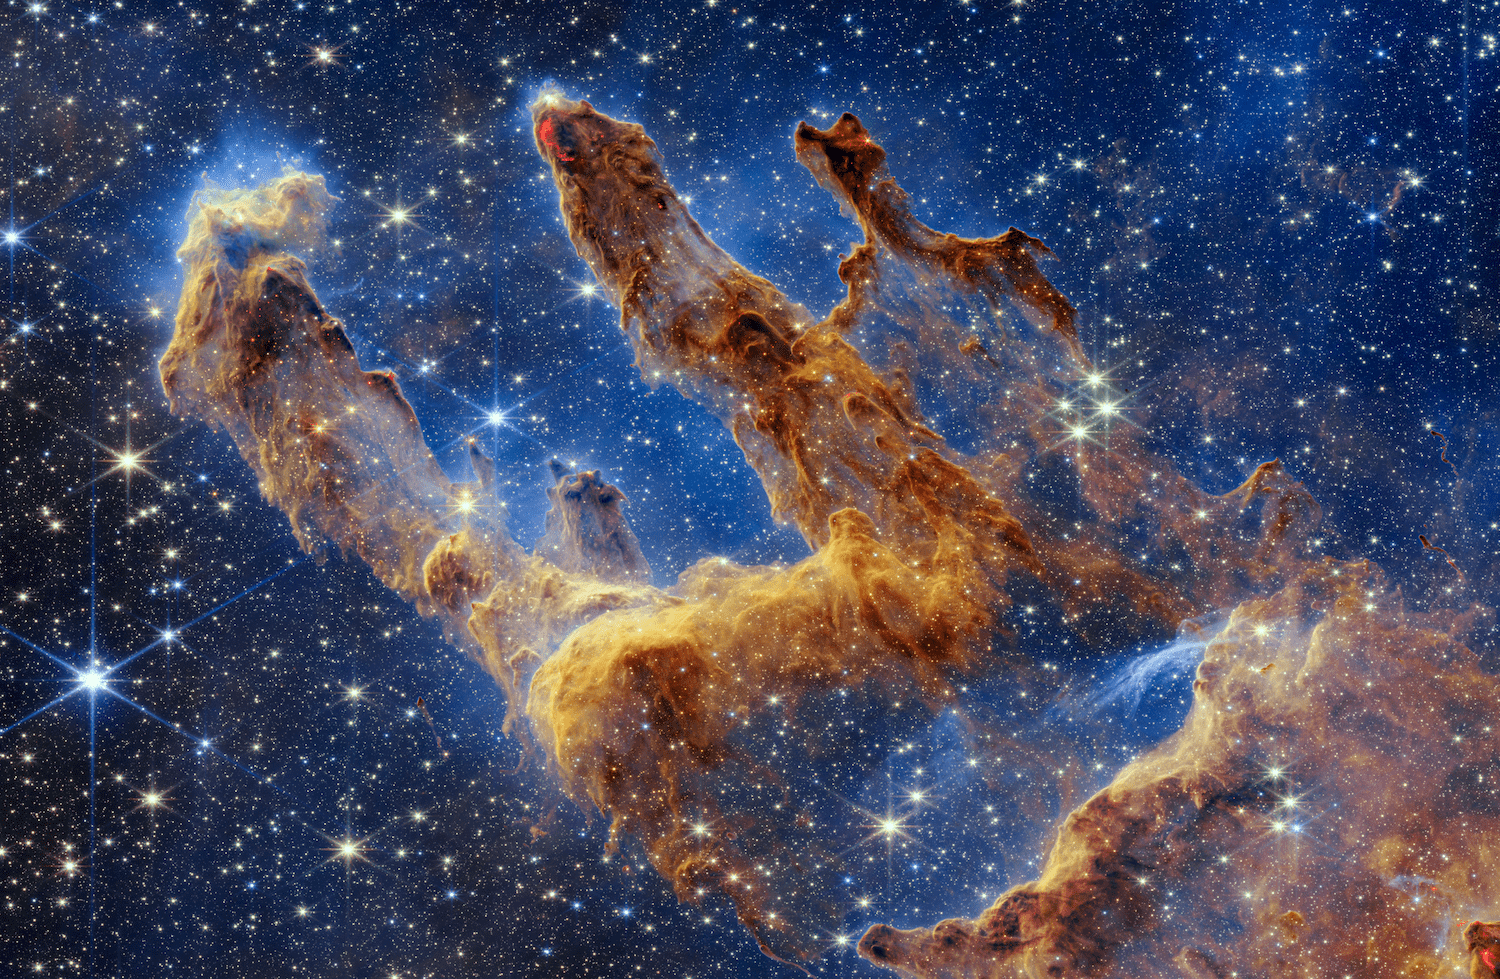 deep in space, orange dense yet wispy pillars look like arches and spires rising out of a desert landscape, but are filled with semi-transparent gas and dust. This is a region where young stars are forming – or have barely burst from their dusty cocoons as they continue to form.